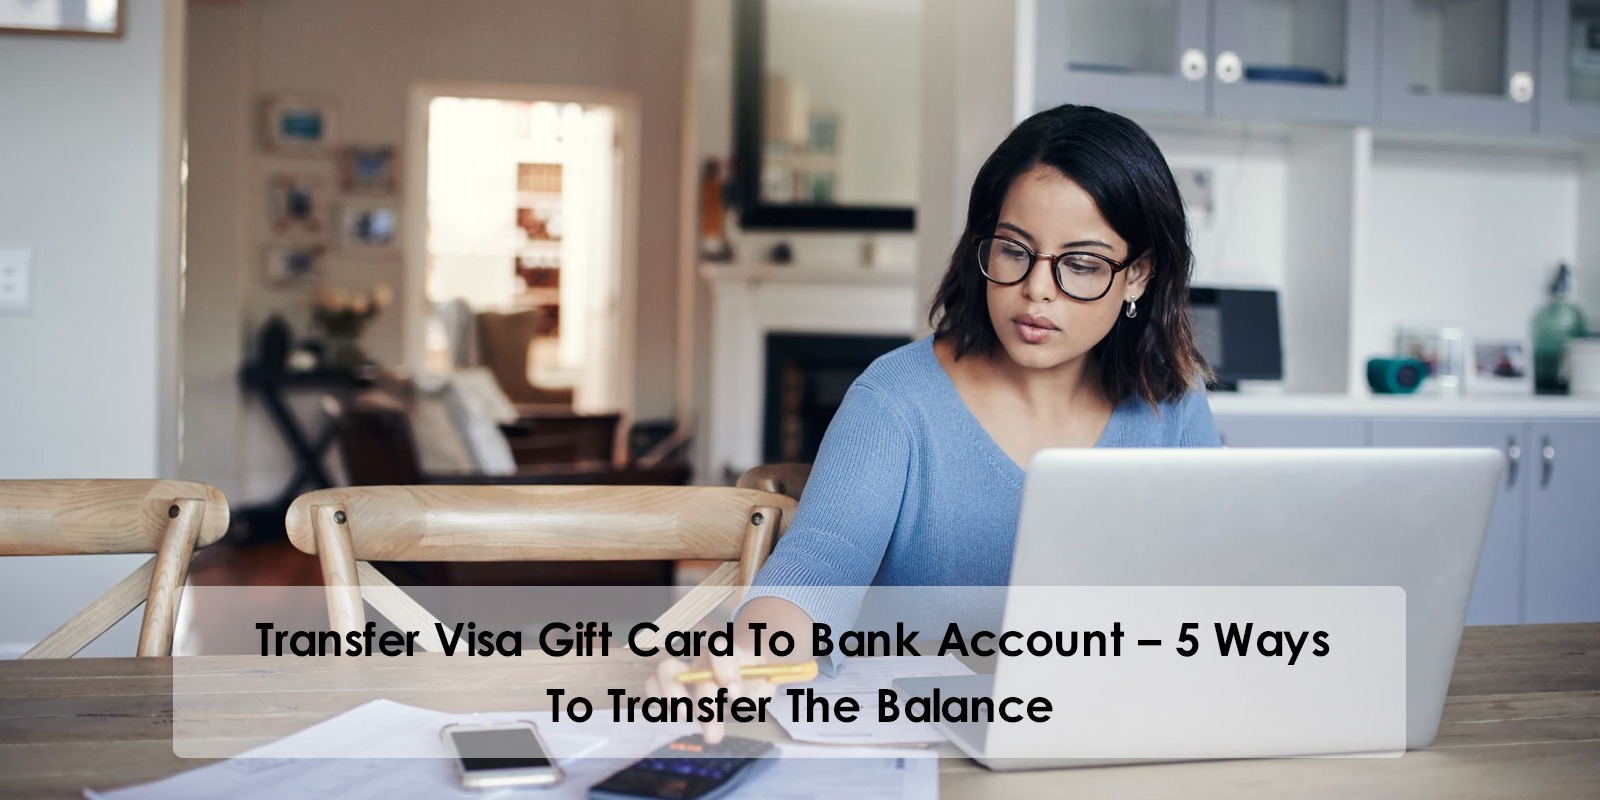 Transfer Visa Gift Card To Bank Account – 5 Ways To Transfer The Balance